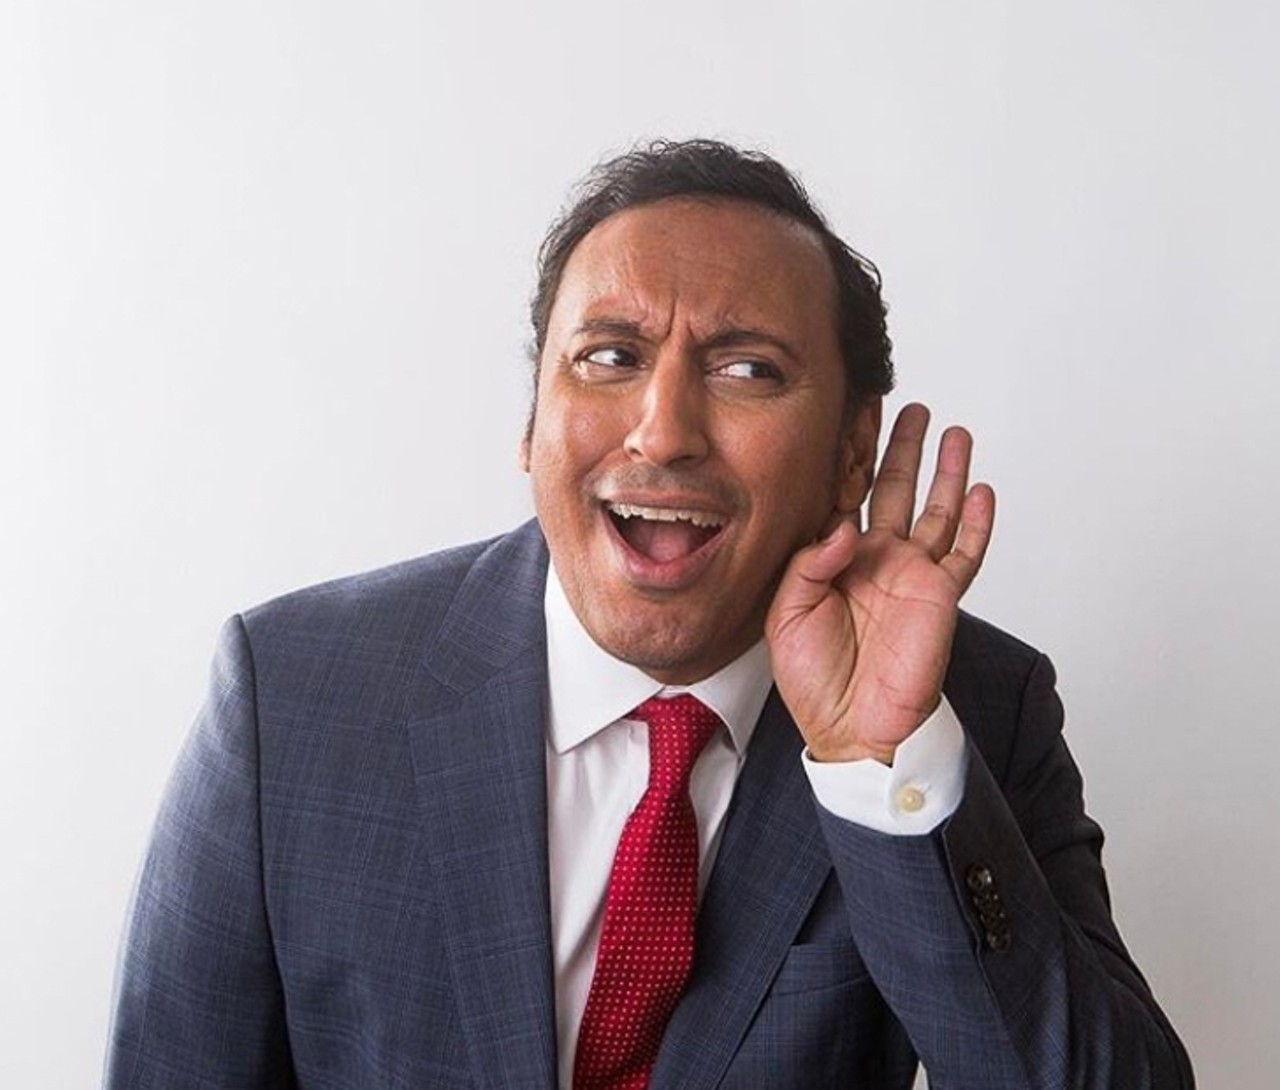 Aasif Mandvi - Tampa Catholic (1984)
Born in India, graduated in Tampa. Mandvi is an actor and producer, best known for his work in Disney&#146;s &#147;Million Dollar Arm,&#148; and &#147;The Proposal&#148; with Sandra Bullock and Ryan Reynolds. Channing Tatum is also a graduate of Tampa Catholic.
Photo via @Aasif/Instagram